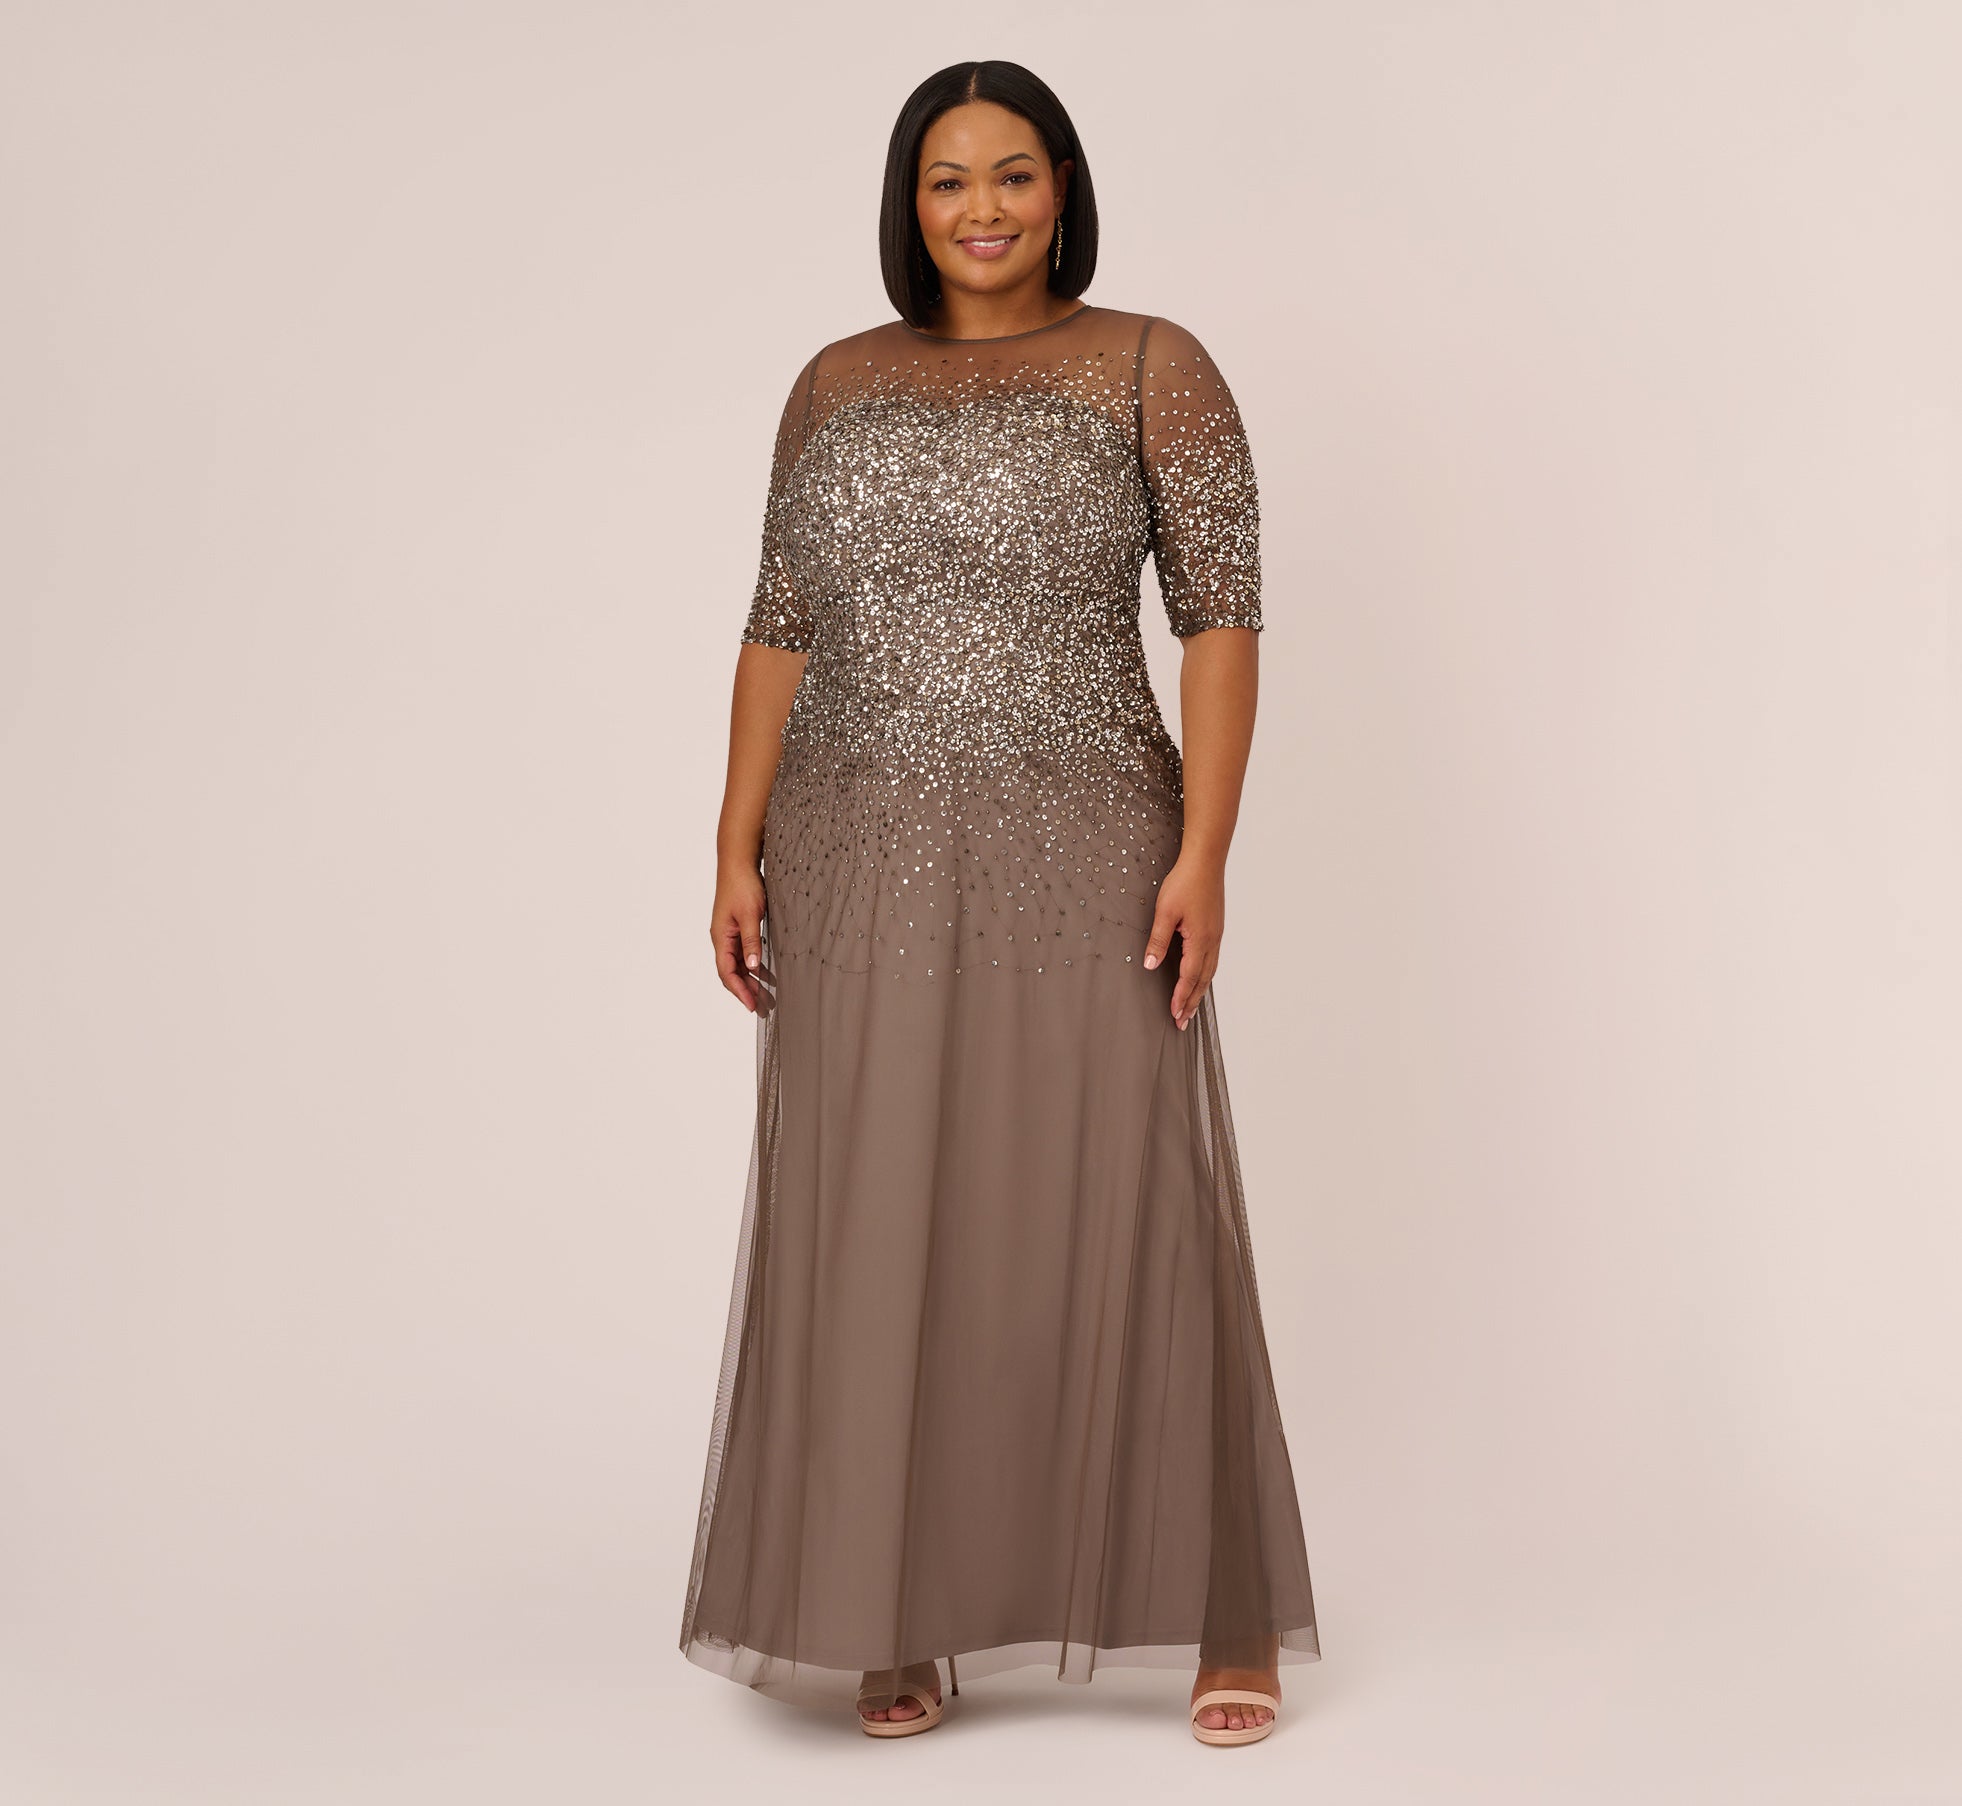 adrianna papell plus size dresses